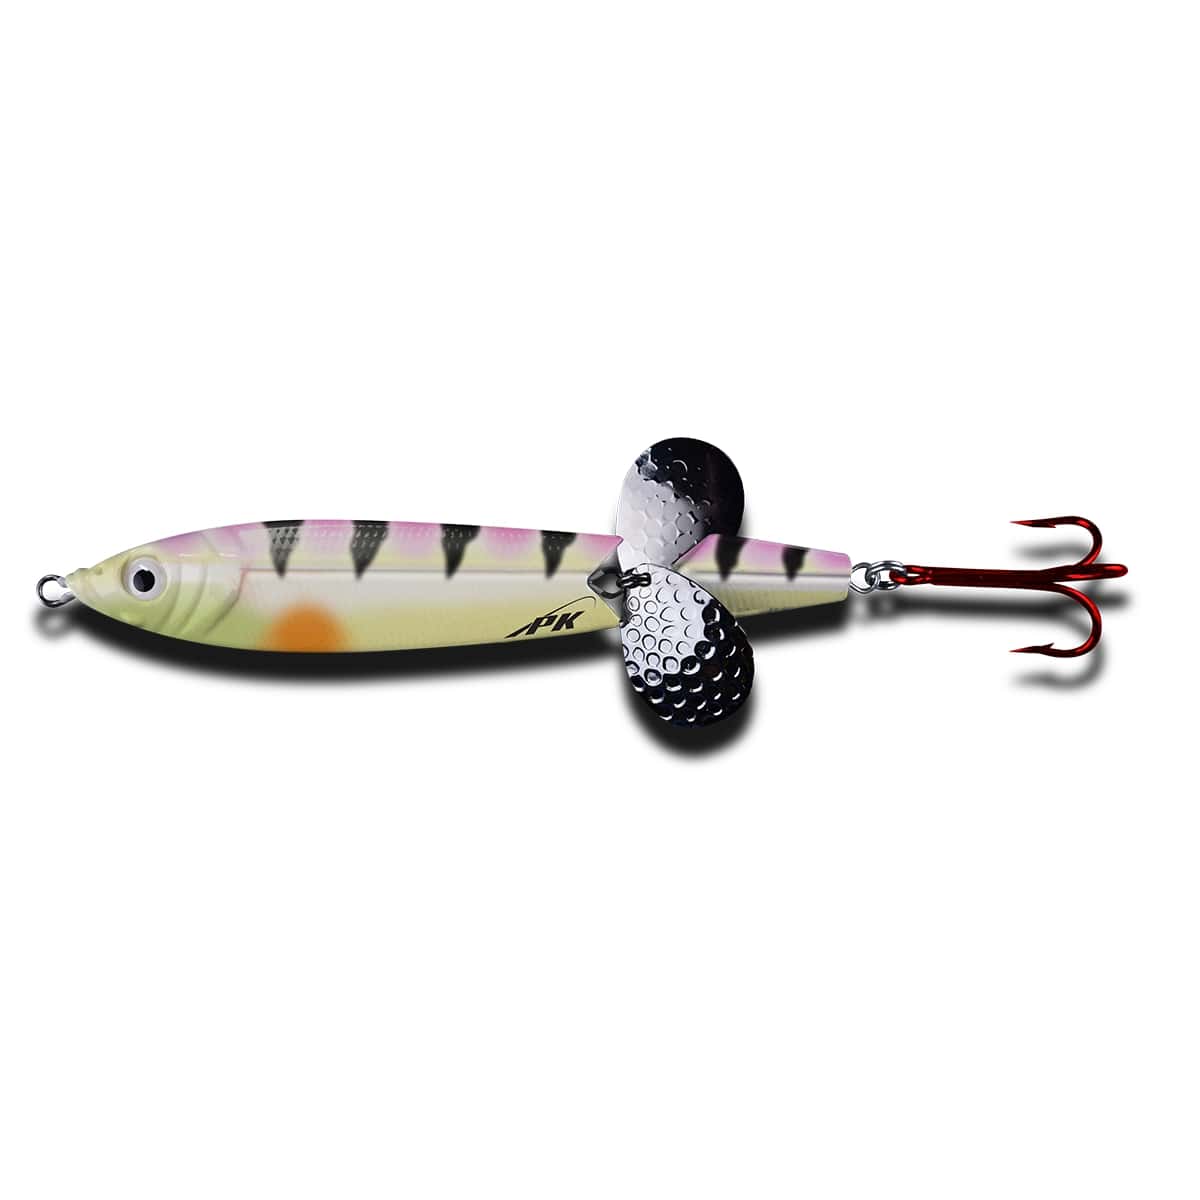 Pk Lures Panic Spoon Color Red Tiger Glow Weight 1/2 oz